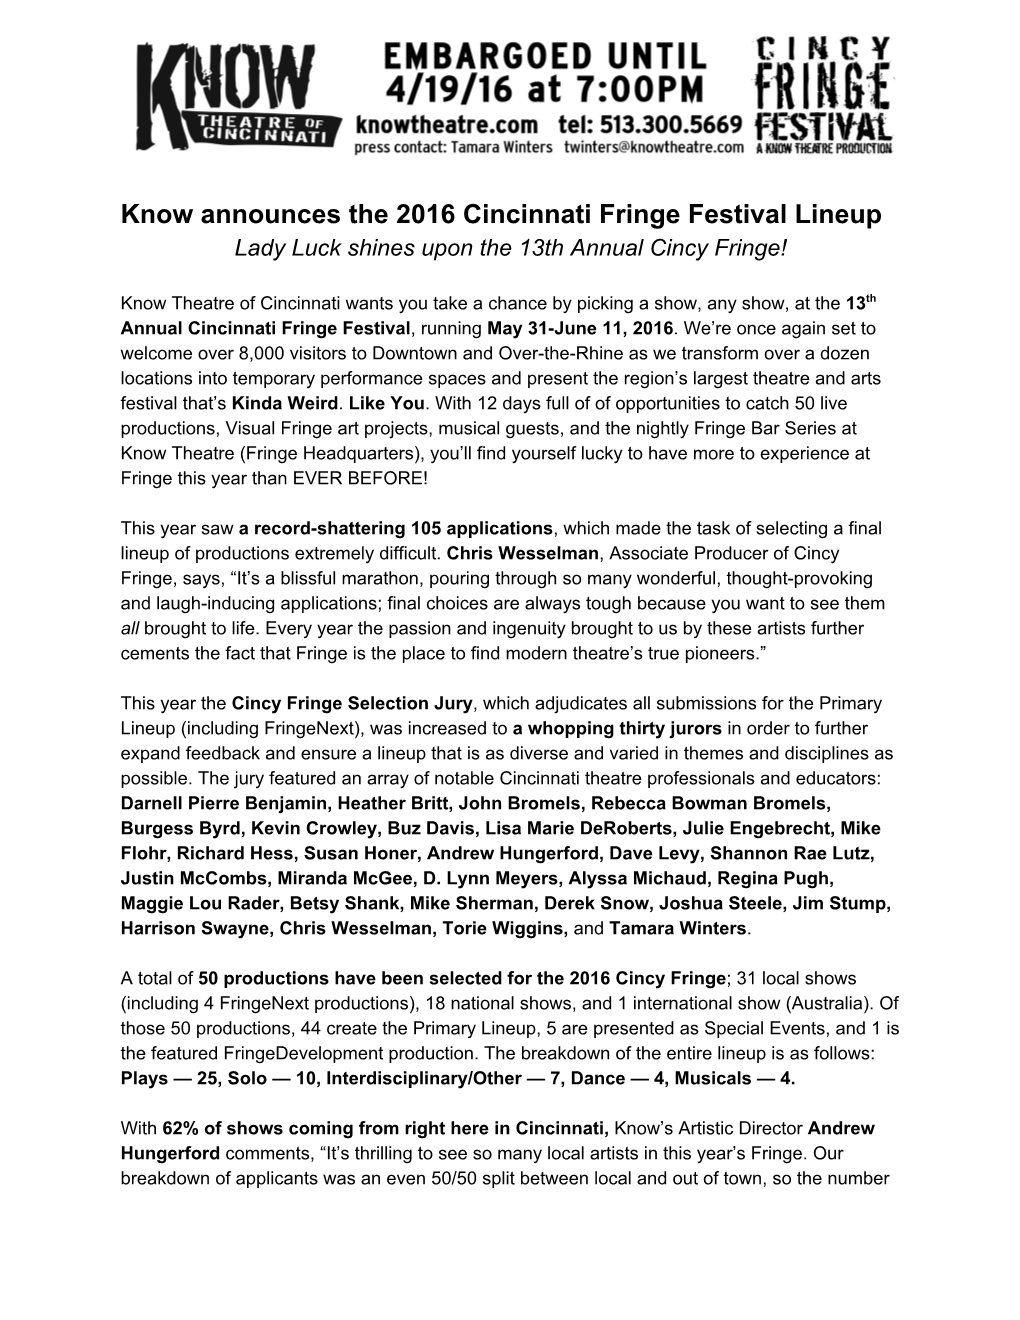 Know Announces the 2016 Cincinnati Fringe Festival Lineup Lady Luck Shines Upon the 13Th Annual Cincy Fringe!